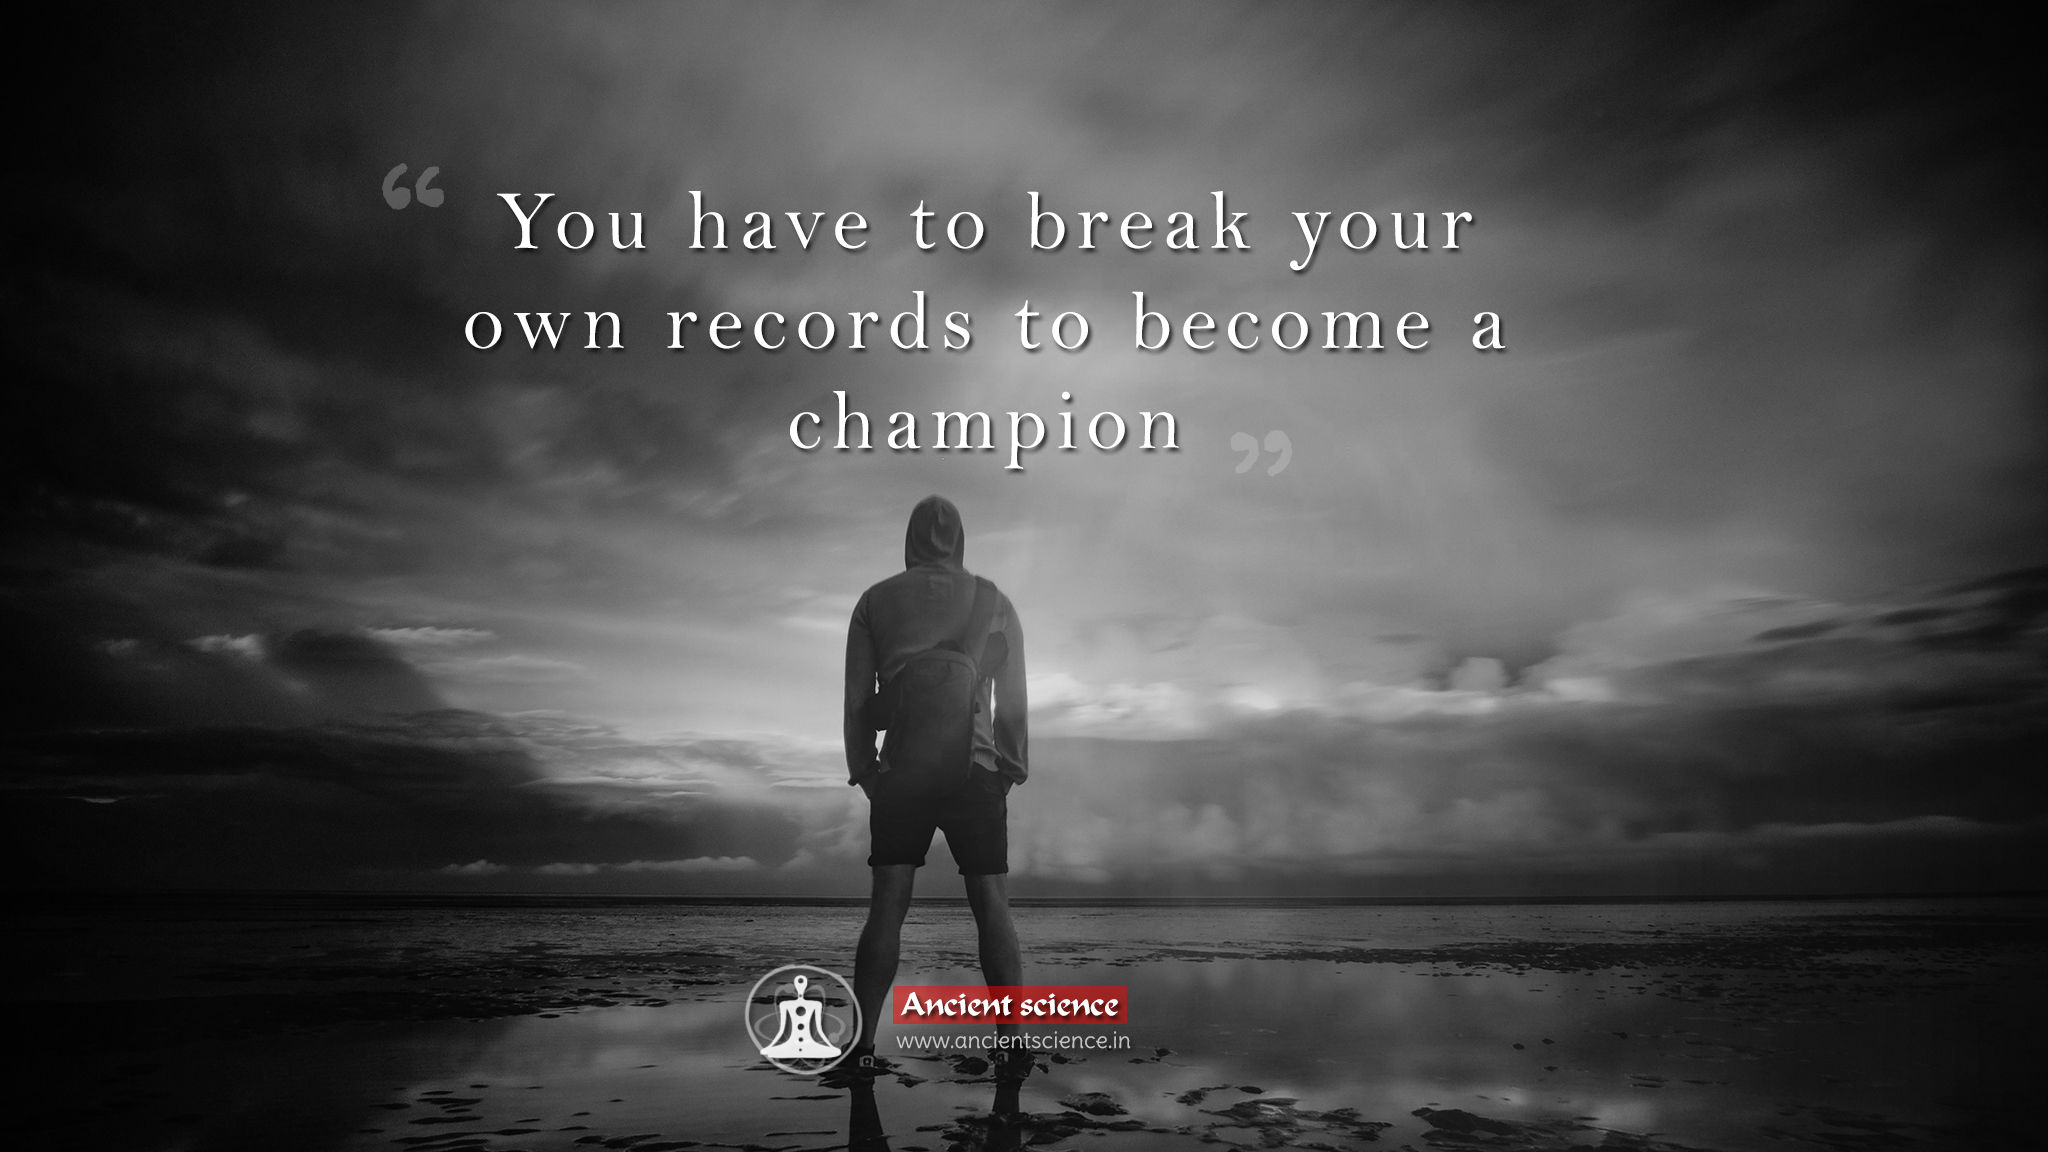 You have to break your own records to become a champion